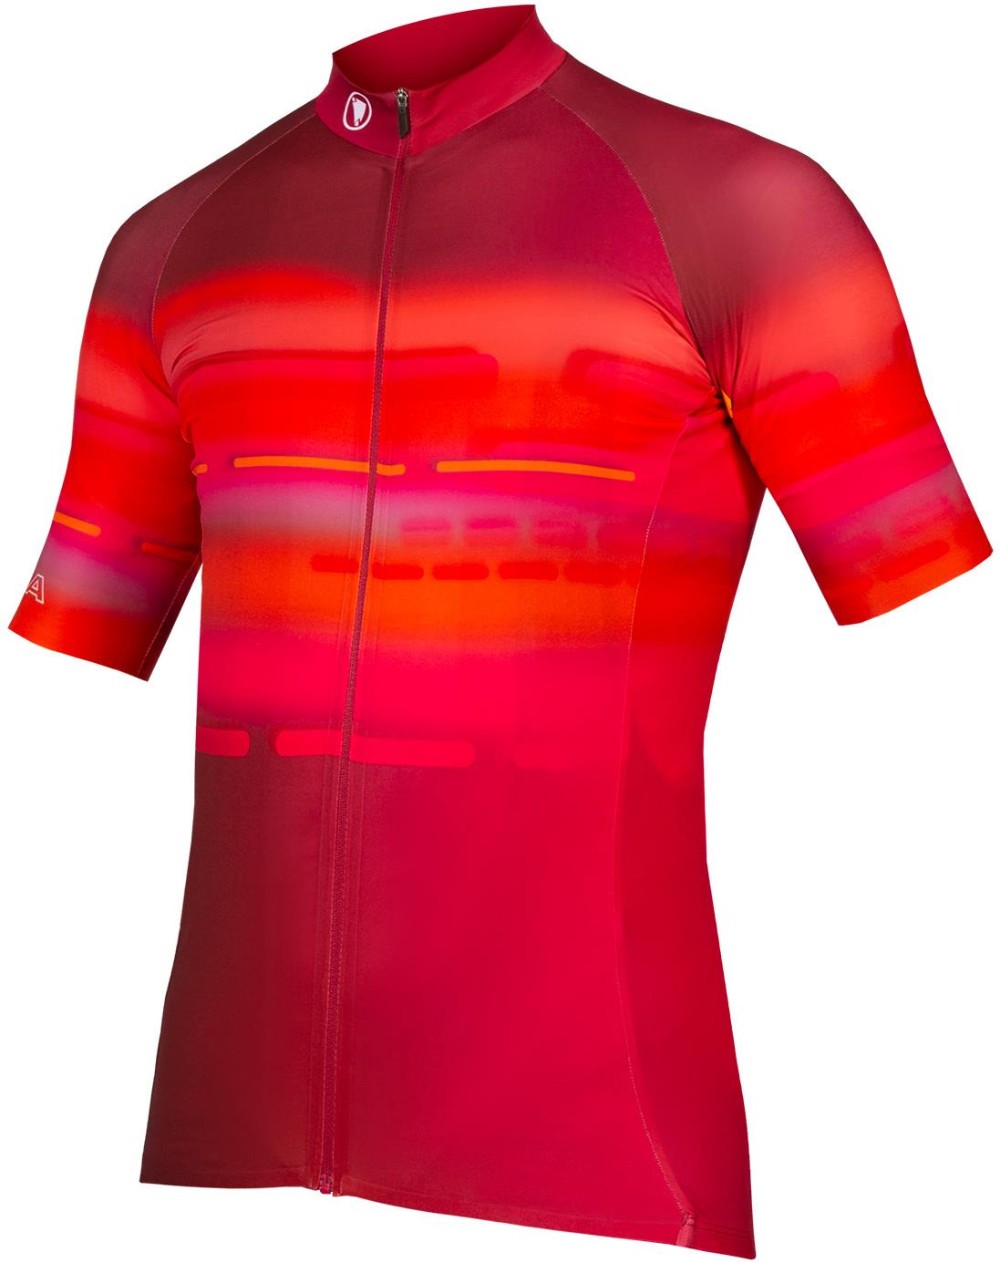 Virtual Texture Short Sleeve Cycling Jersey Limited Edition image 0